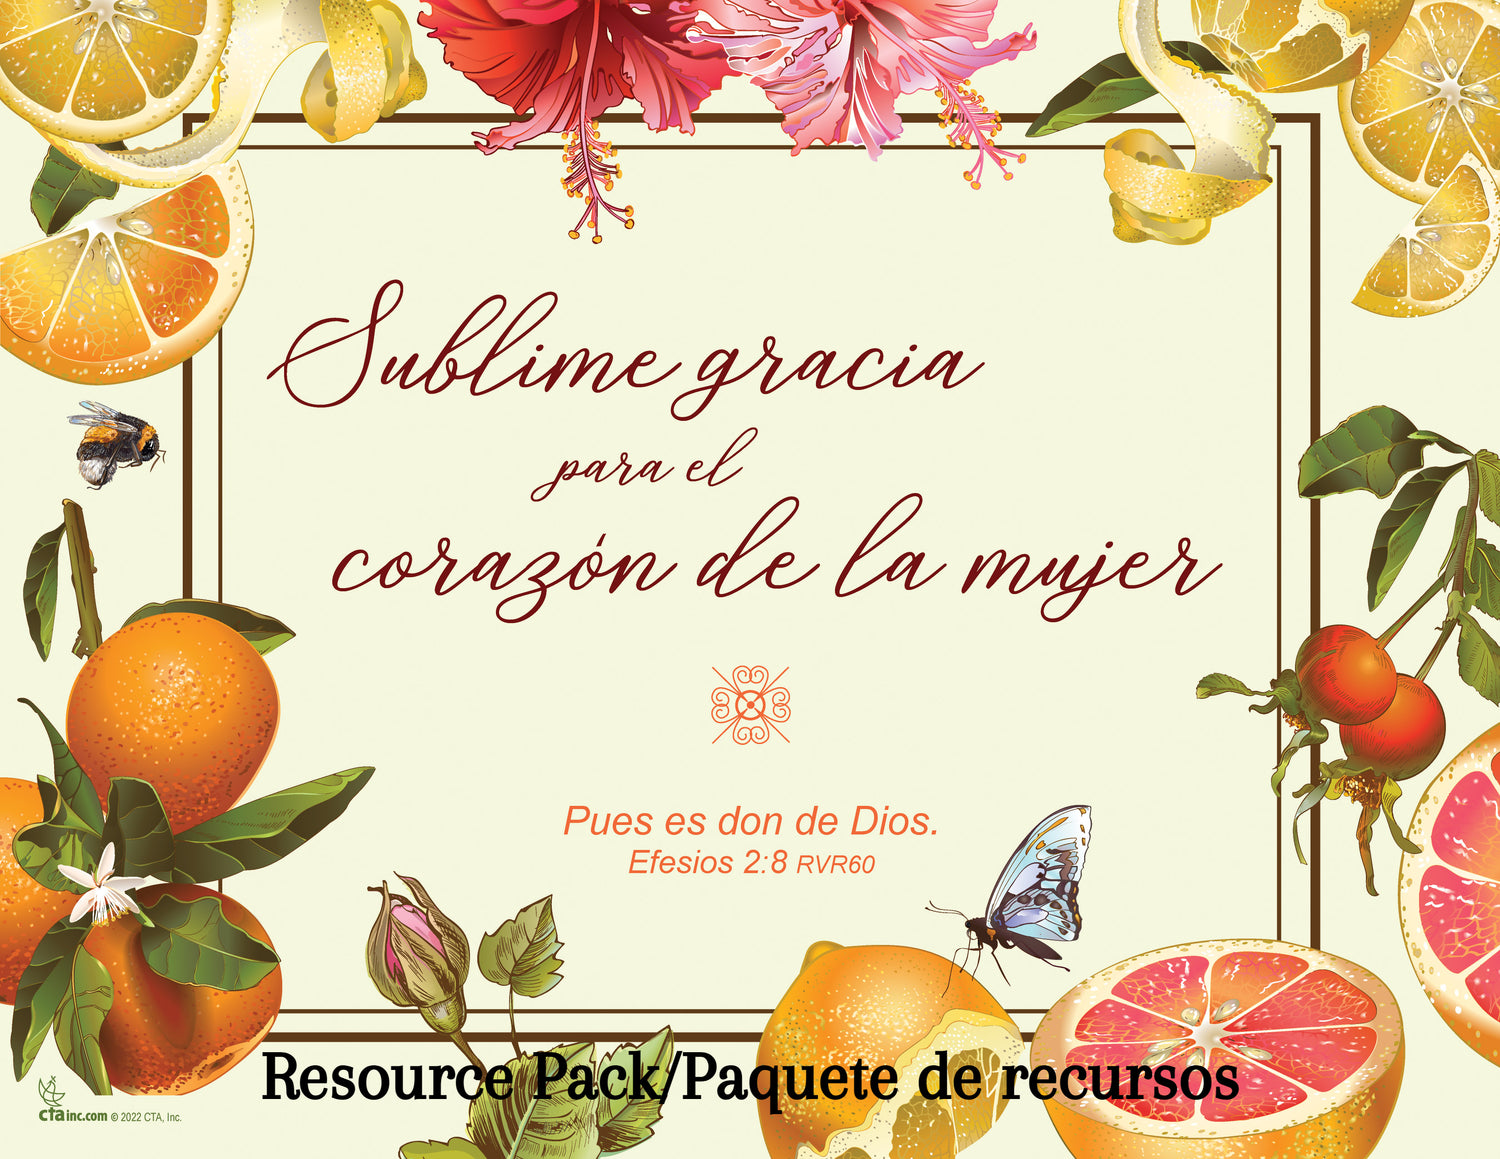 Spanish Resource Pack - Amazing Grace for a Woman's Heart